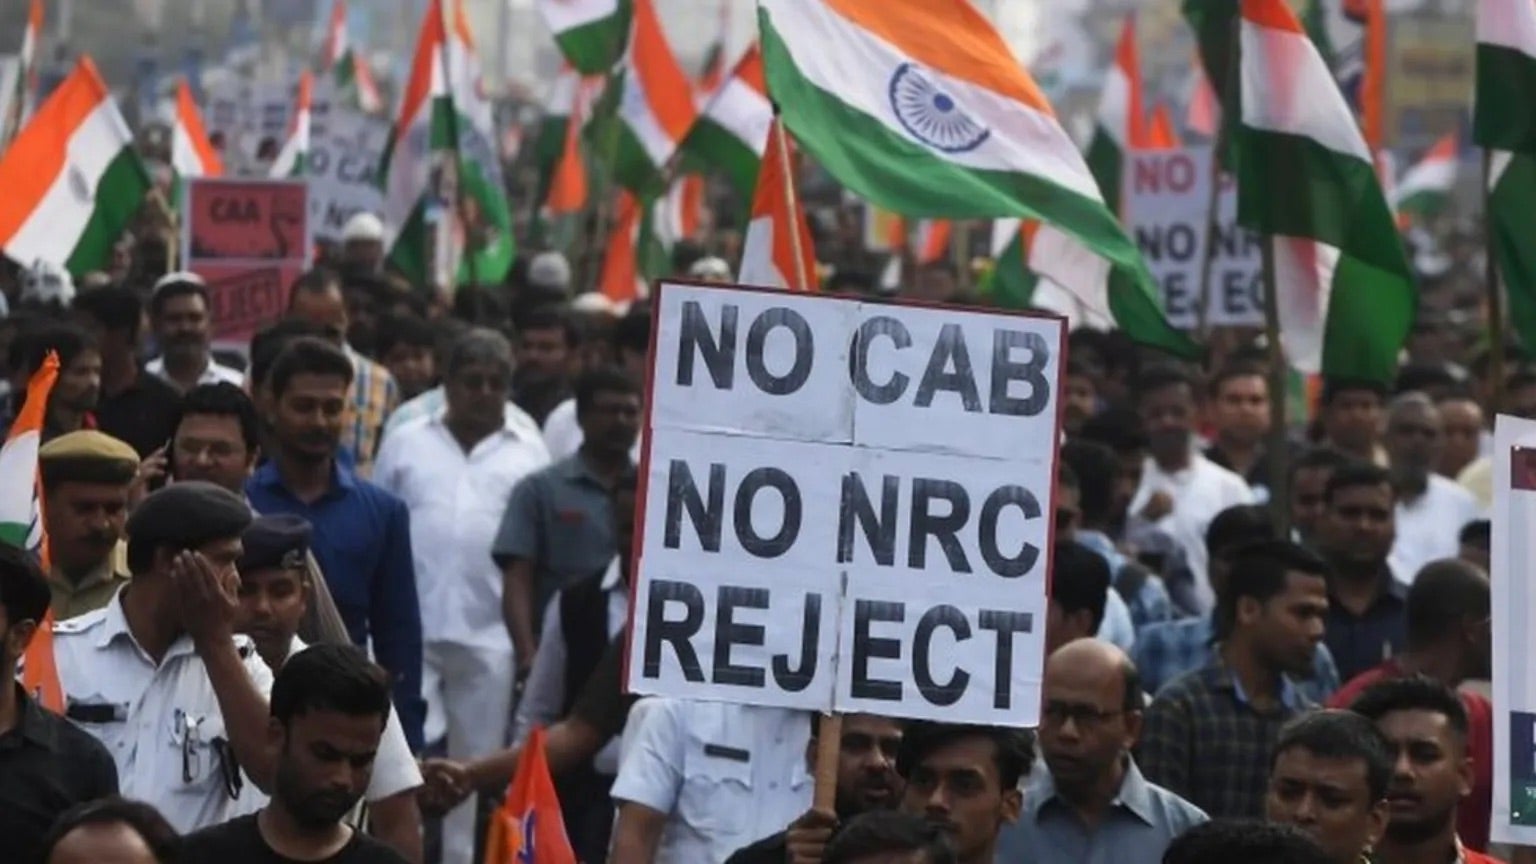 An Image of Protests across India against the new Indian Citizenship Law